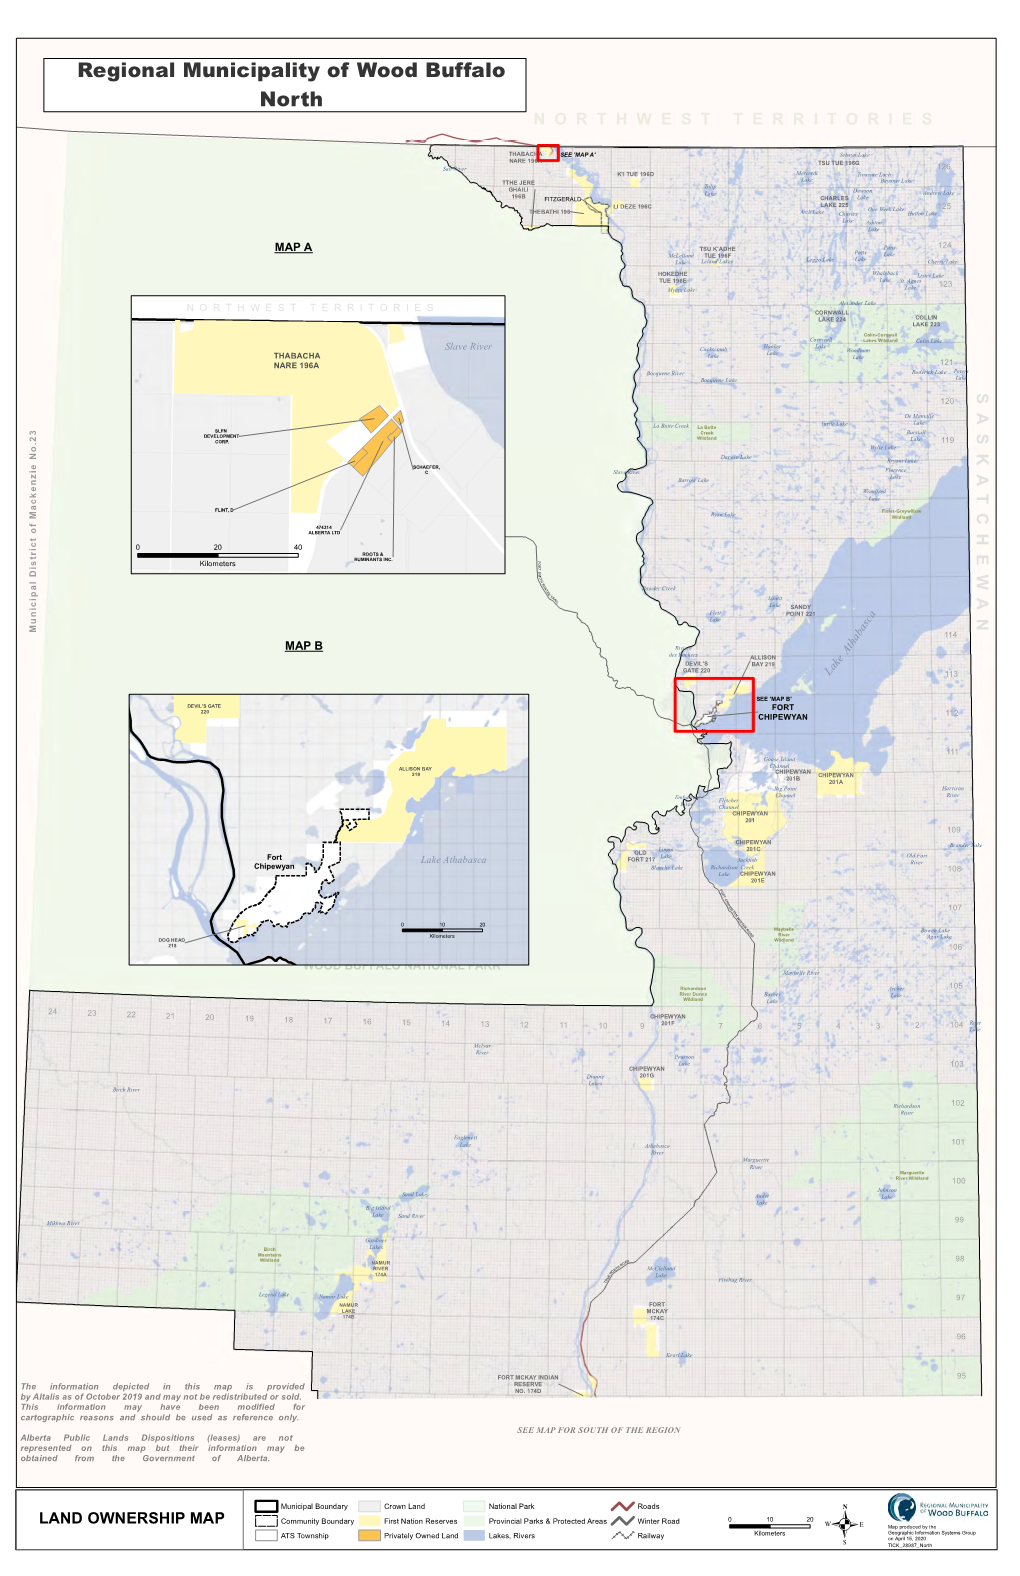 LAND OWNERSHIP MAP Map Produced by the Kilometers Geographic Information Systems Group ATS Township Privately Owned Land Lakes, Rivers Railway on April 15, 2020